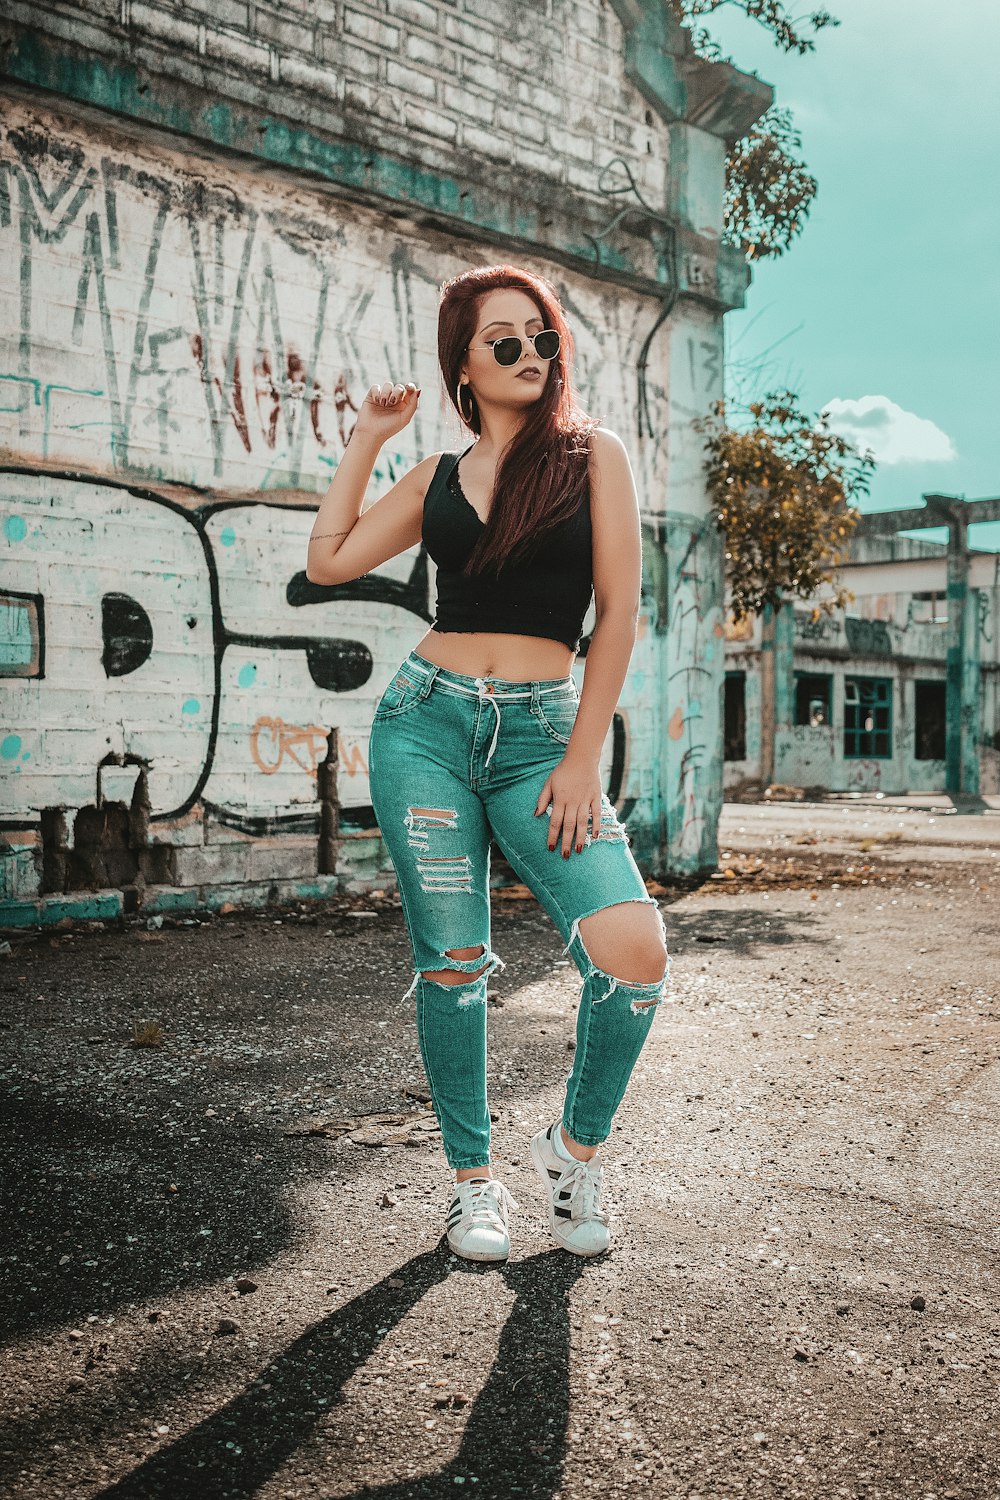 woman wearing black V-neck sleeveless top and distressed blue denim pants outfit while taking photo